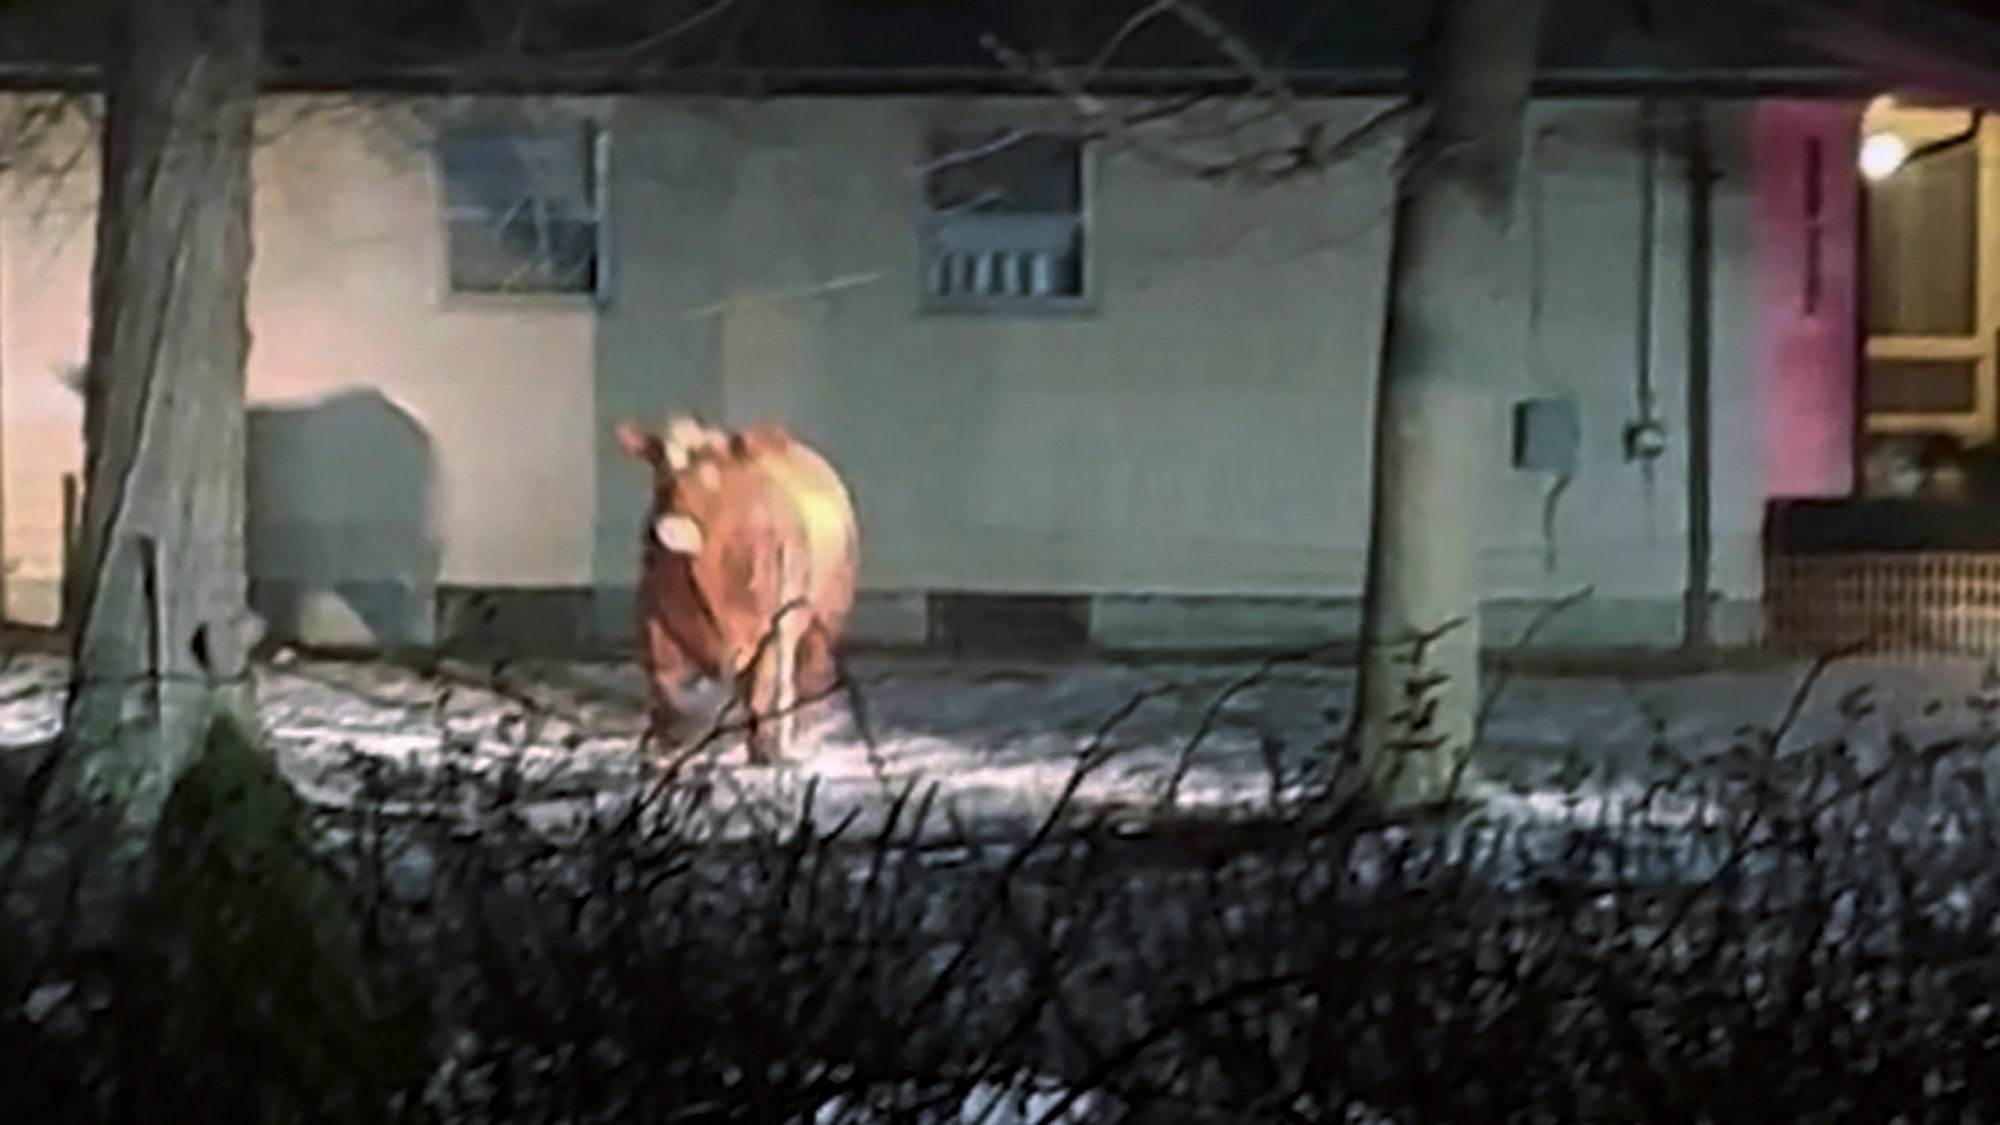 Loose cow is still on the run in Rhode Island, police say: 'Stay clear of the steer'